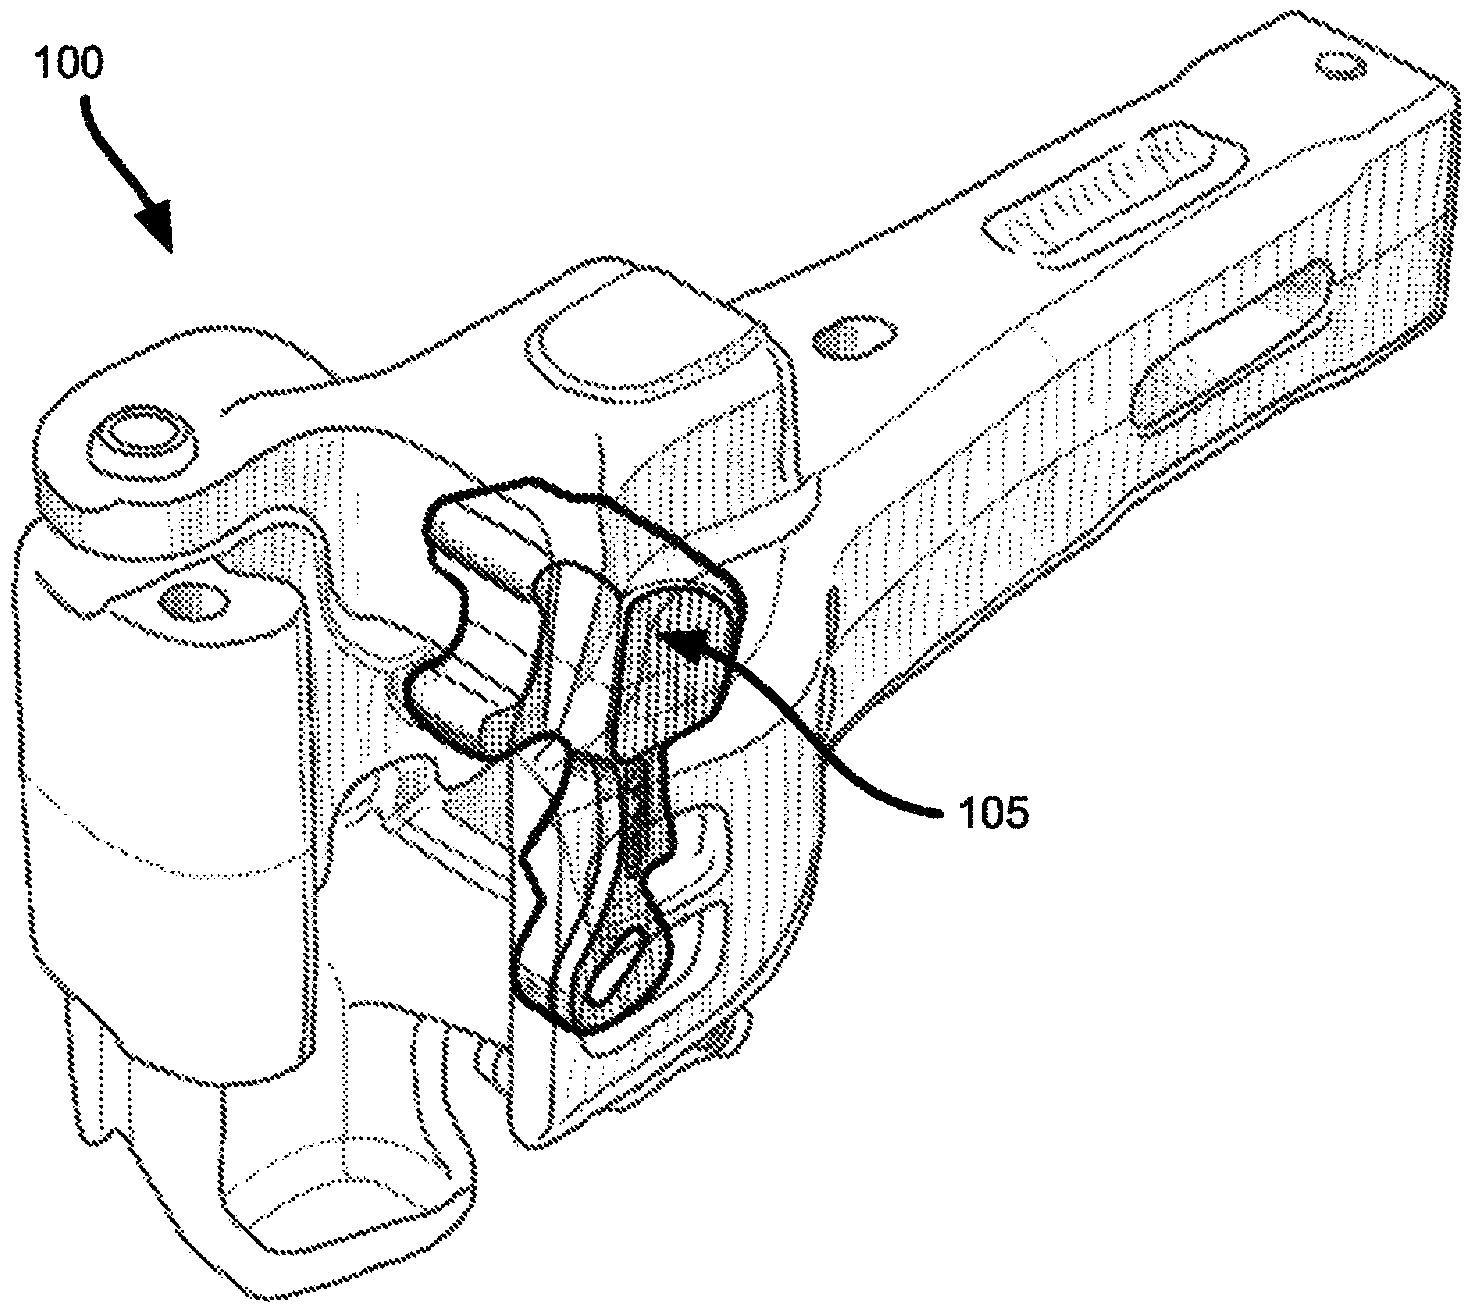 Method and system for manufacturing railcar coupler locks